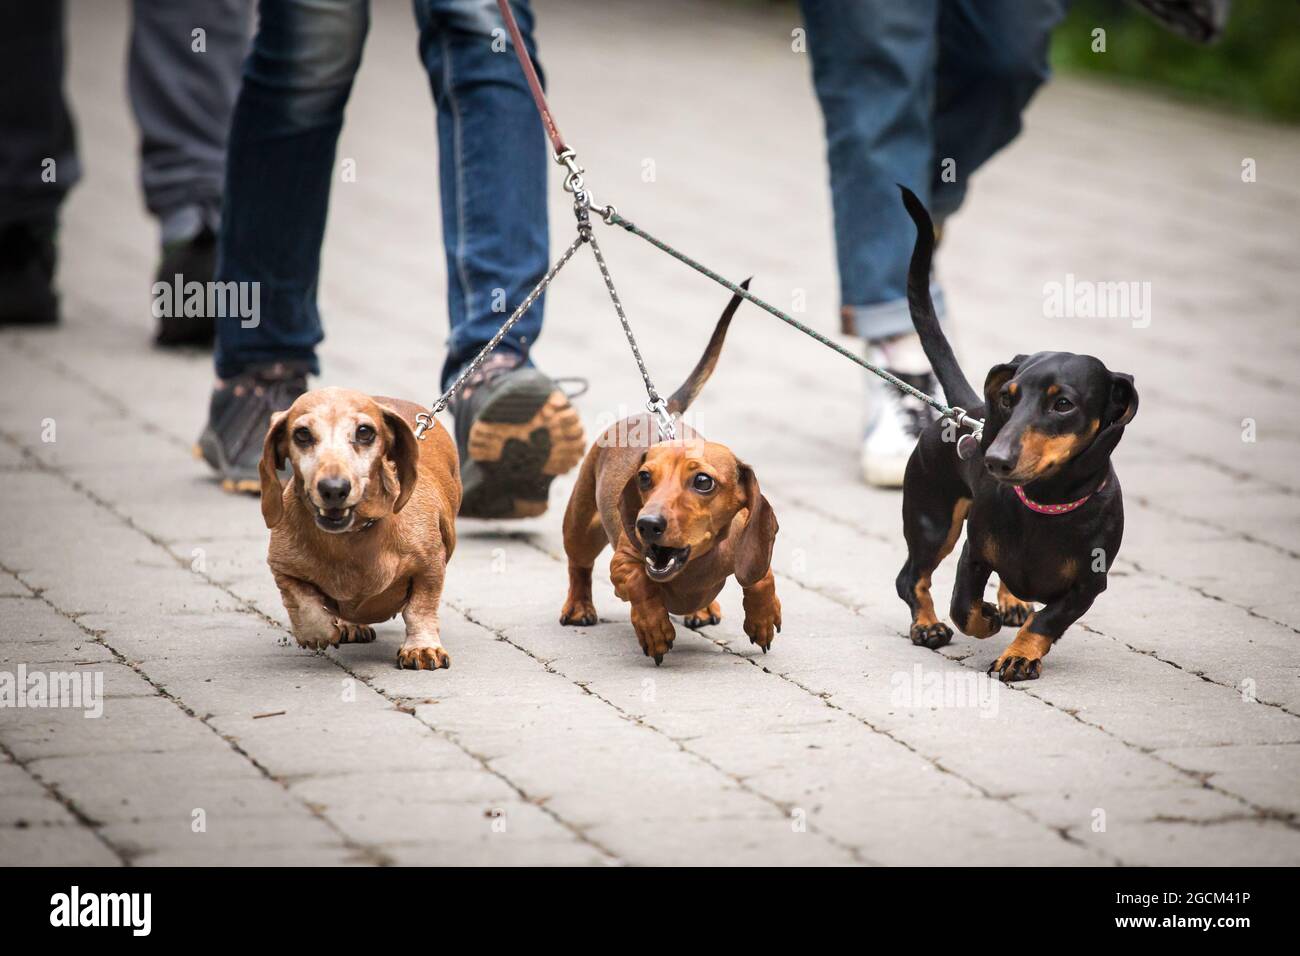 Three Dachshunds pulling on the leash Stock Photo